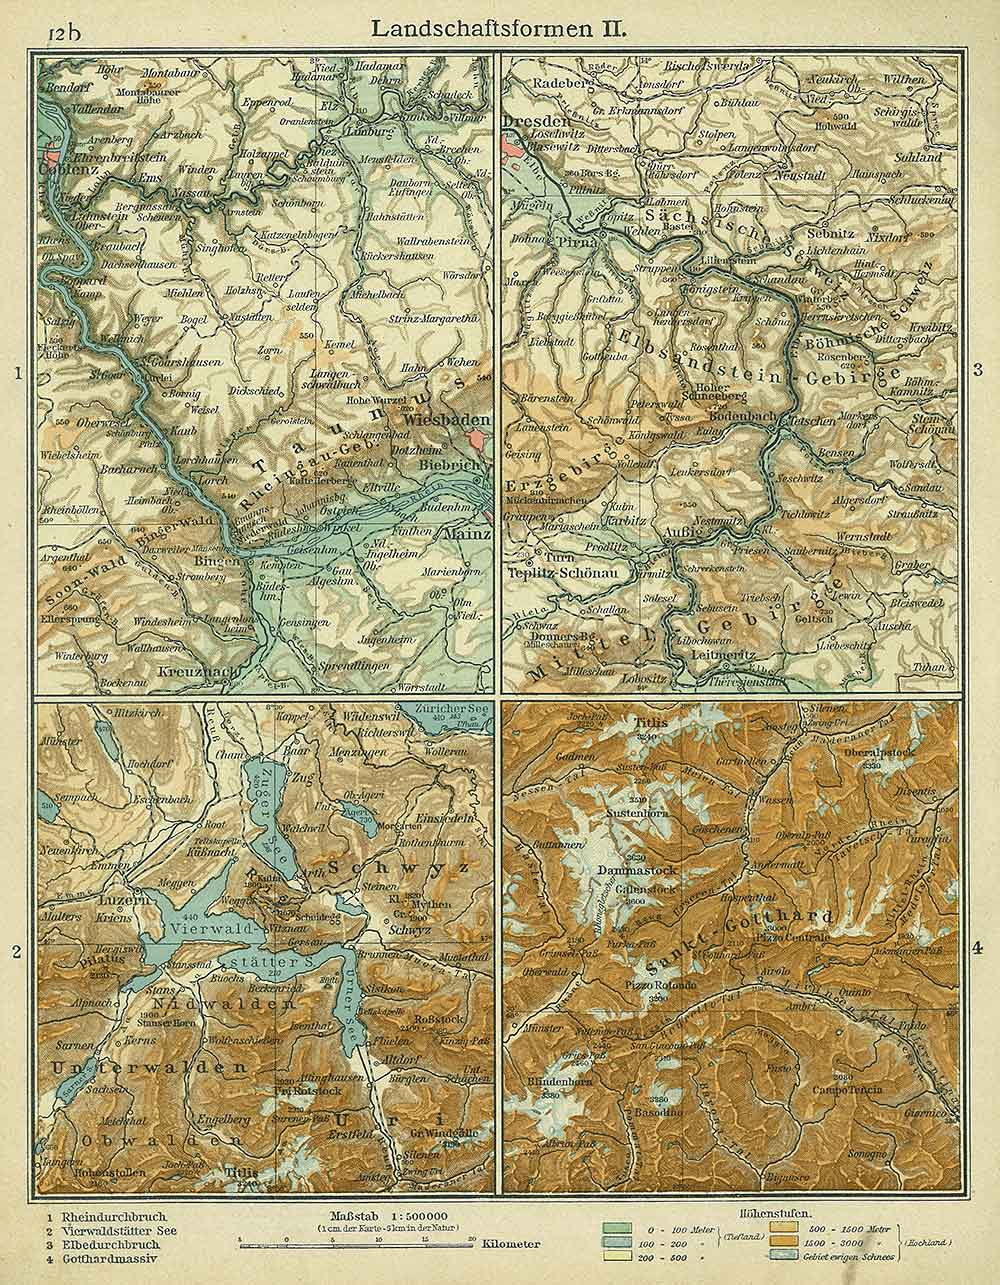 Landscape forms of Germany 2, Andrees 'Berliner Schul-Atlas', 1916, page 12b, published size to print borders 20.3 cm wide by 26.87 cm high.